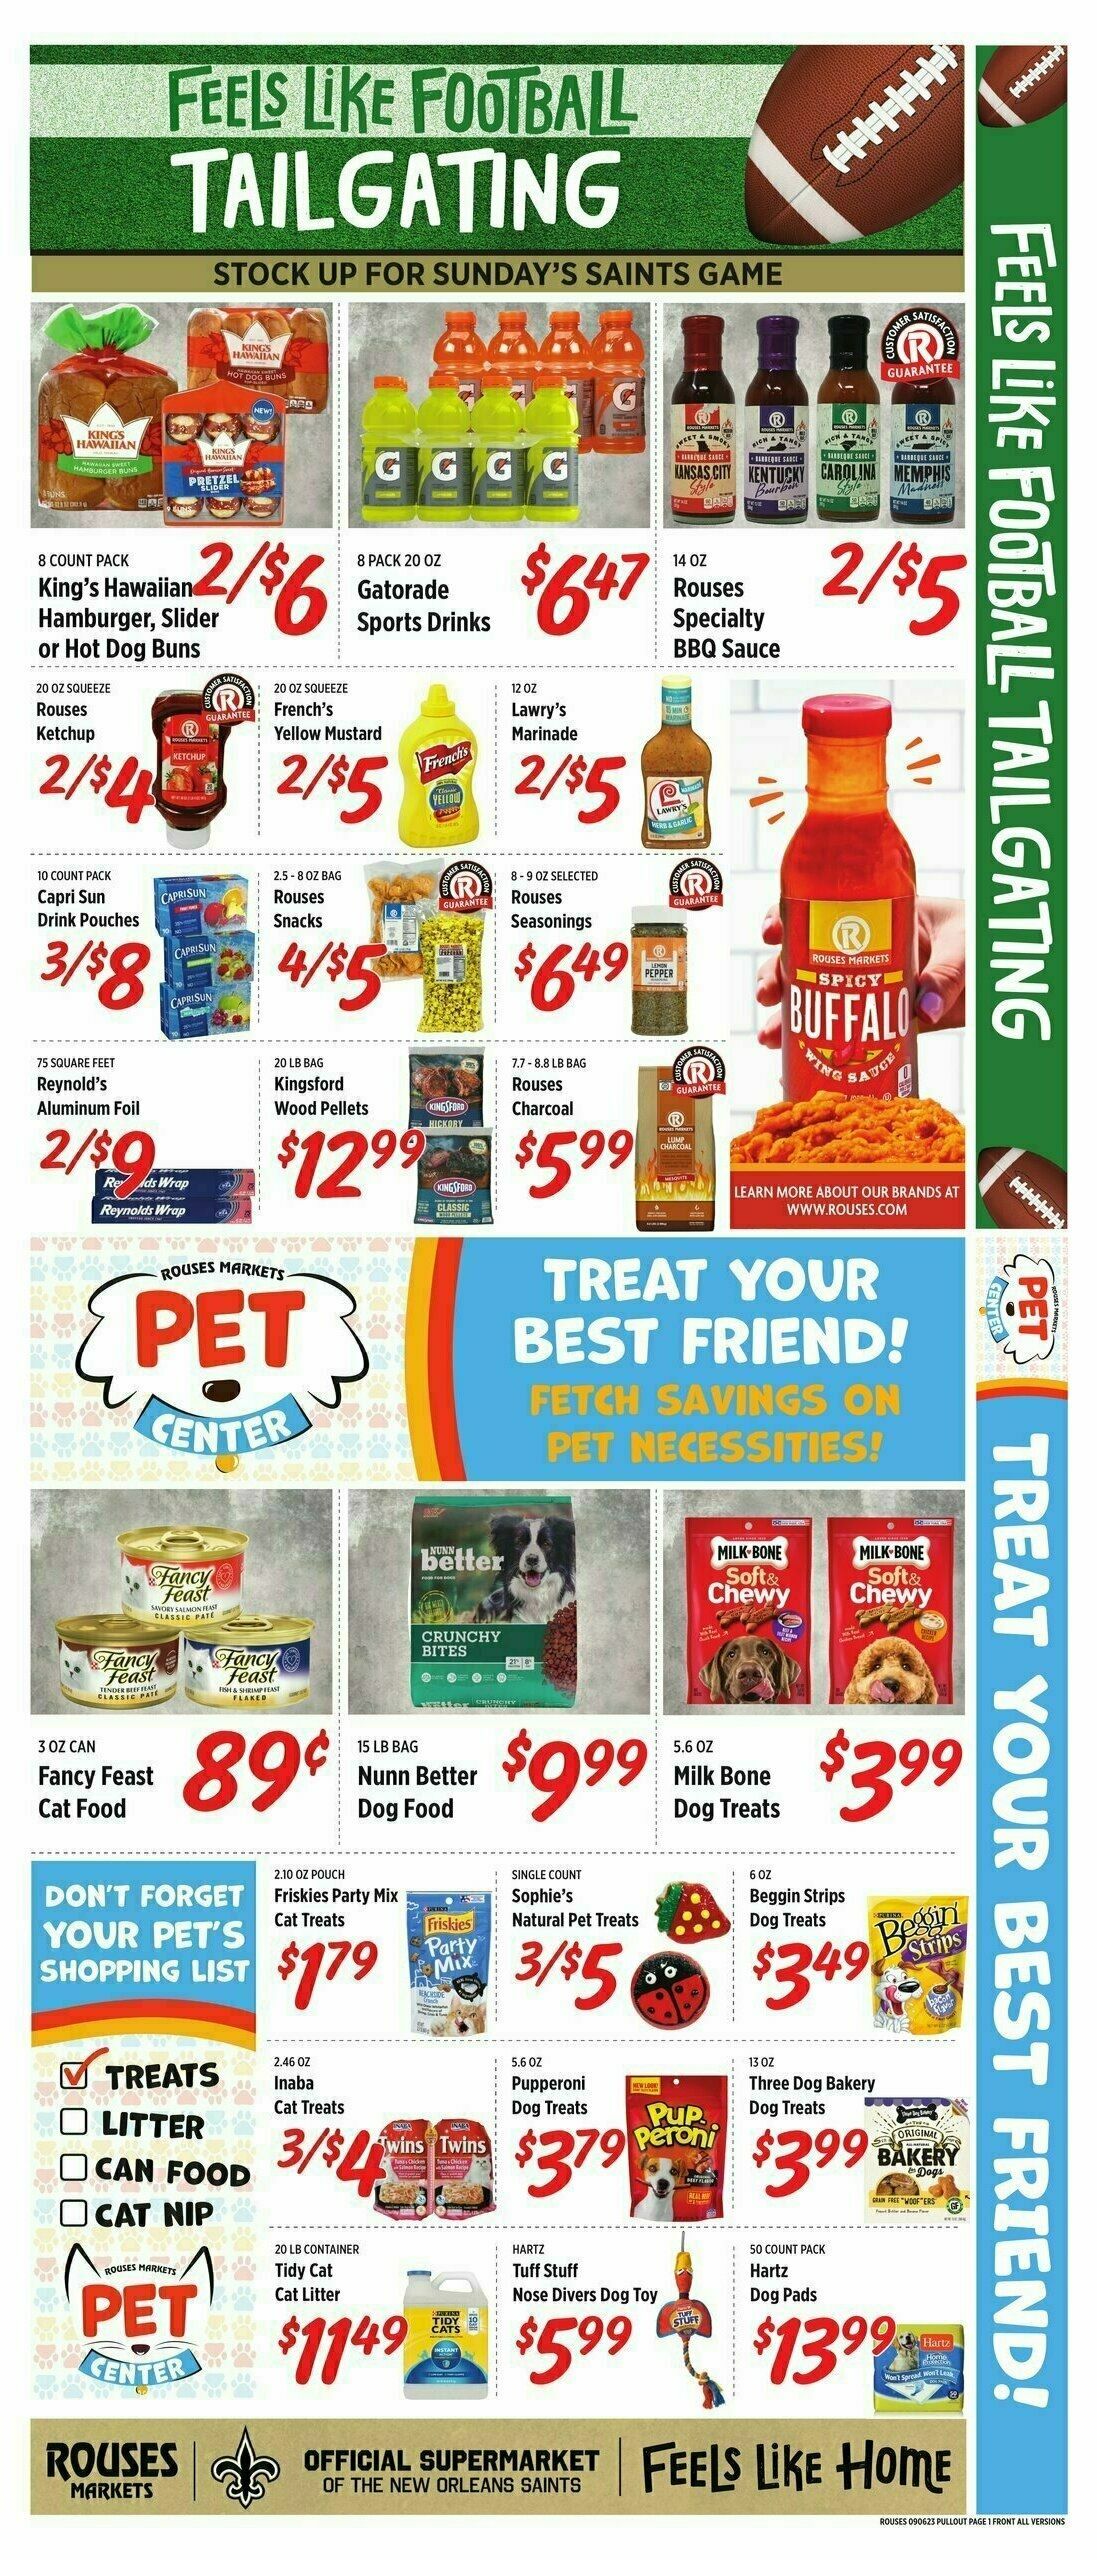 Rouses Markets Weekly Ad from September 6